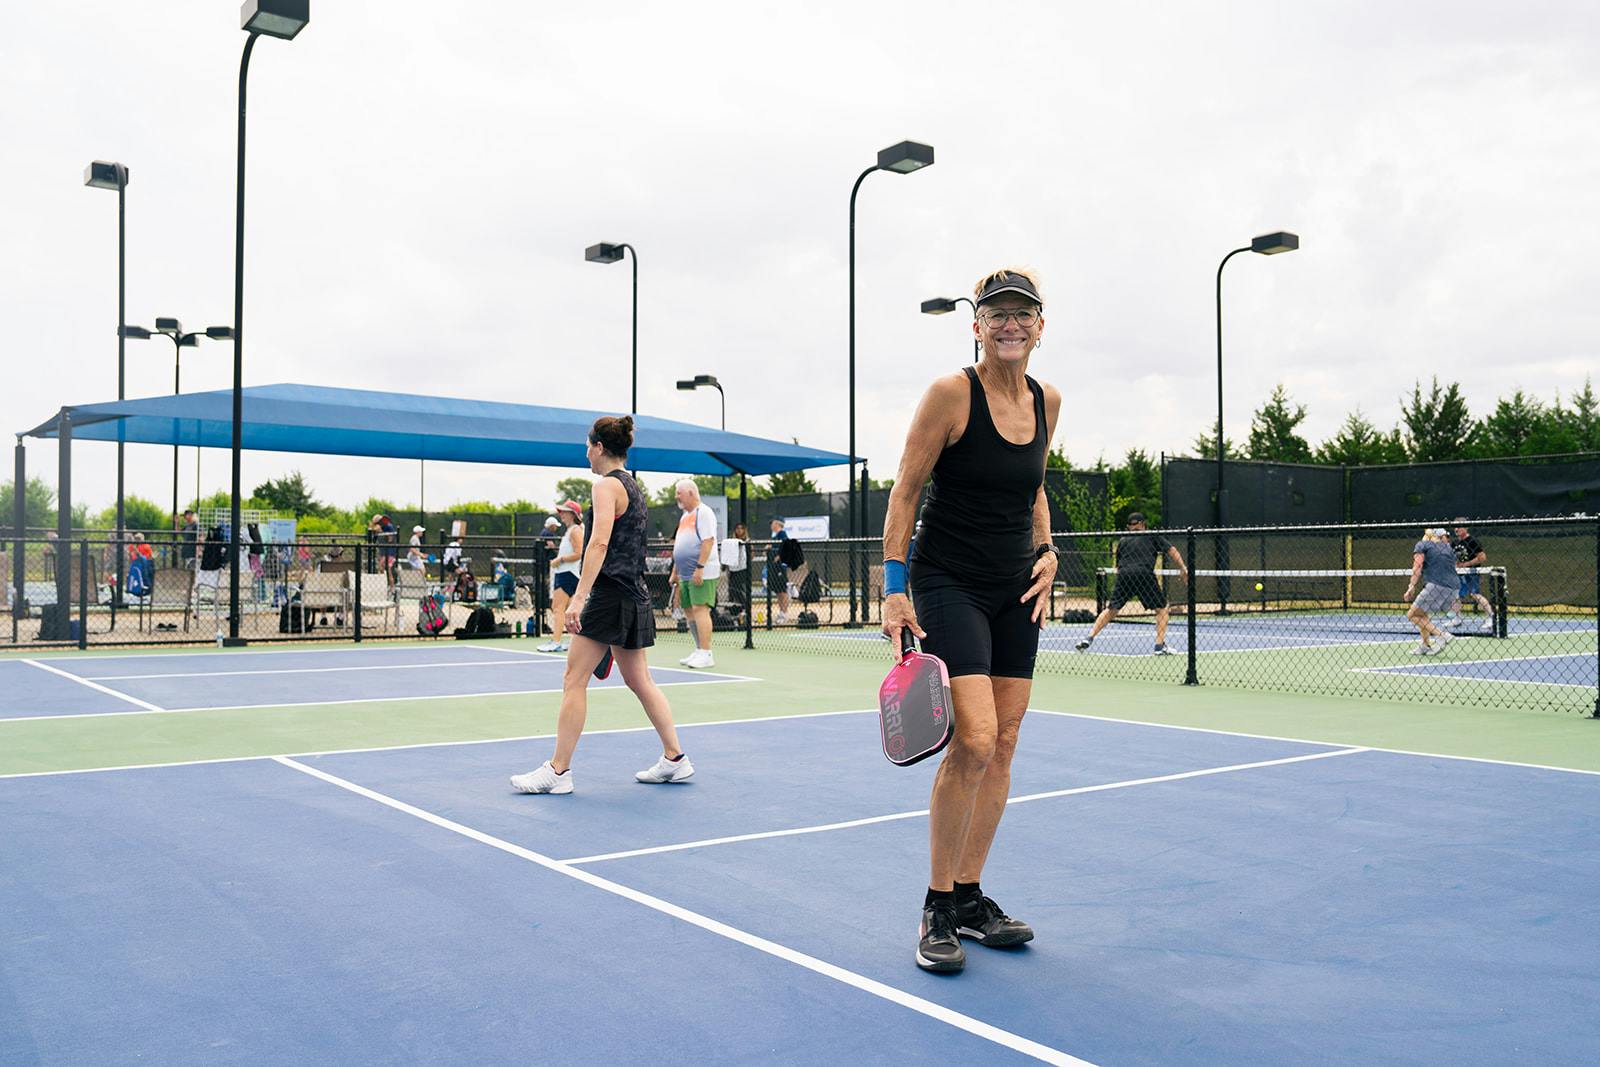 Image 3 of 4 of OASiS Pickleball Club court